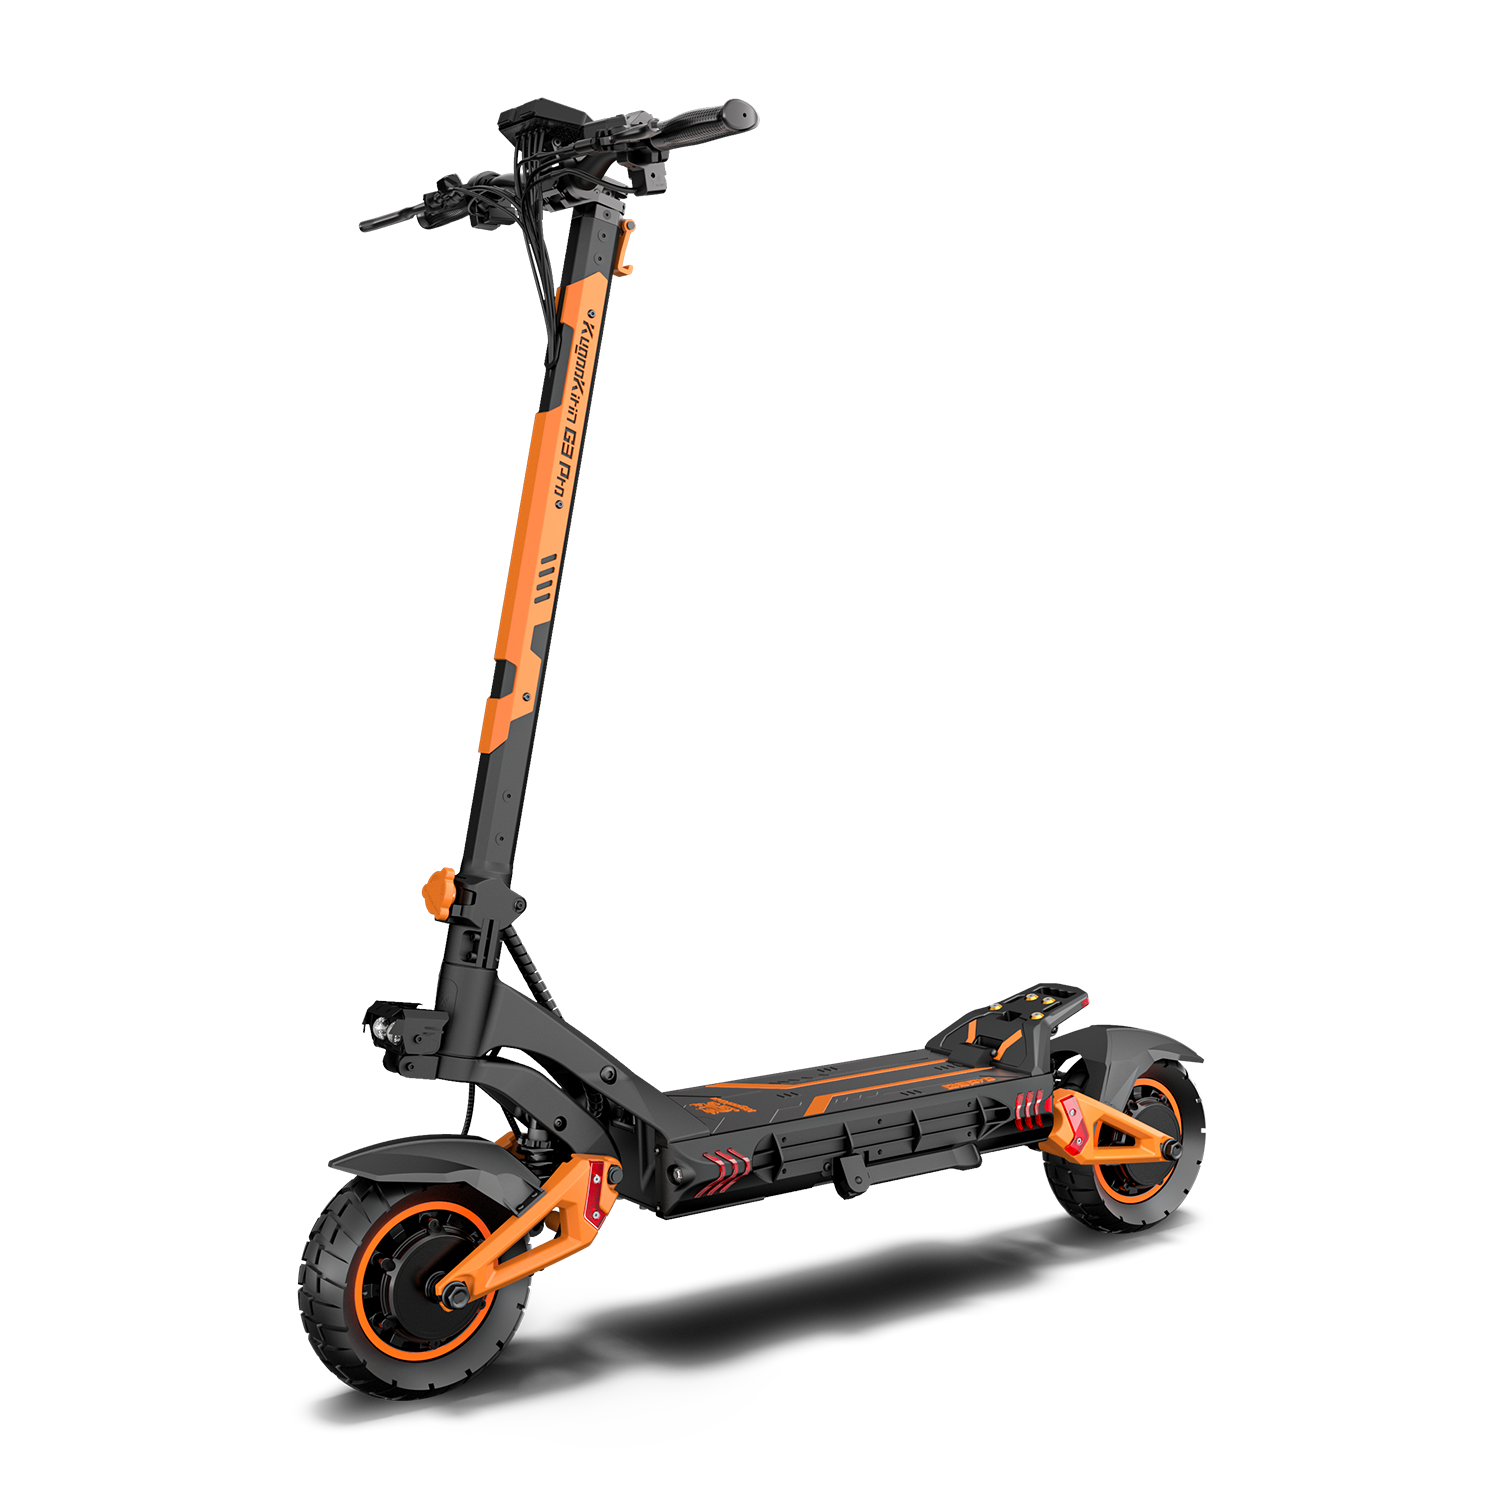 Off-road electric scooter